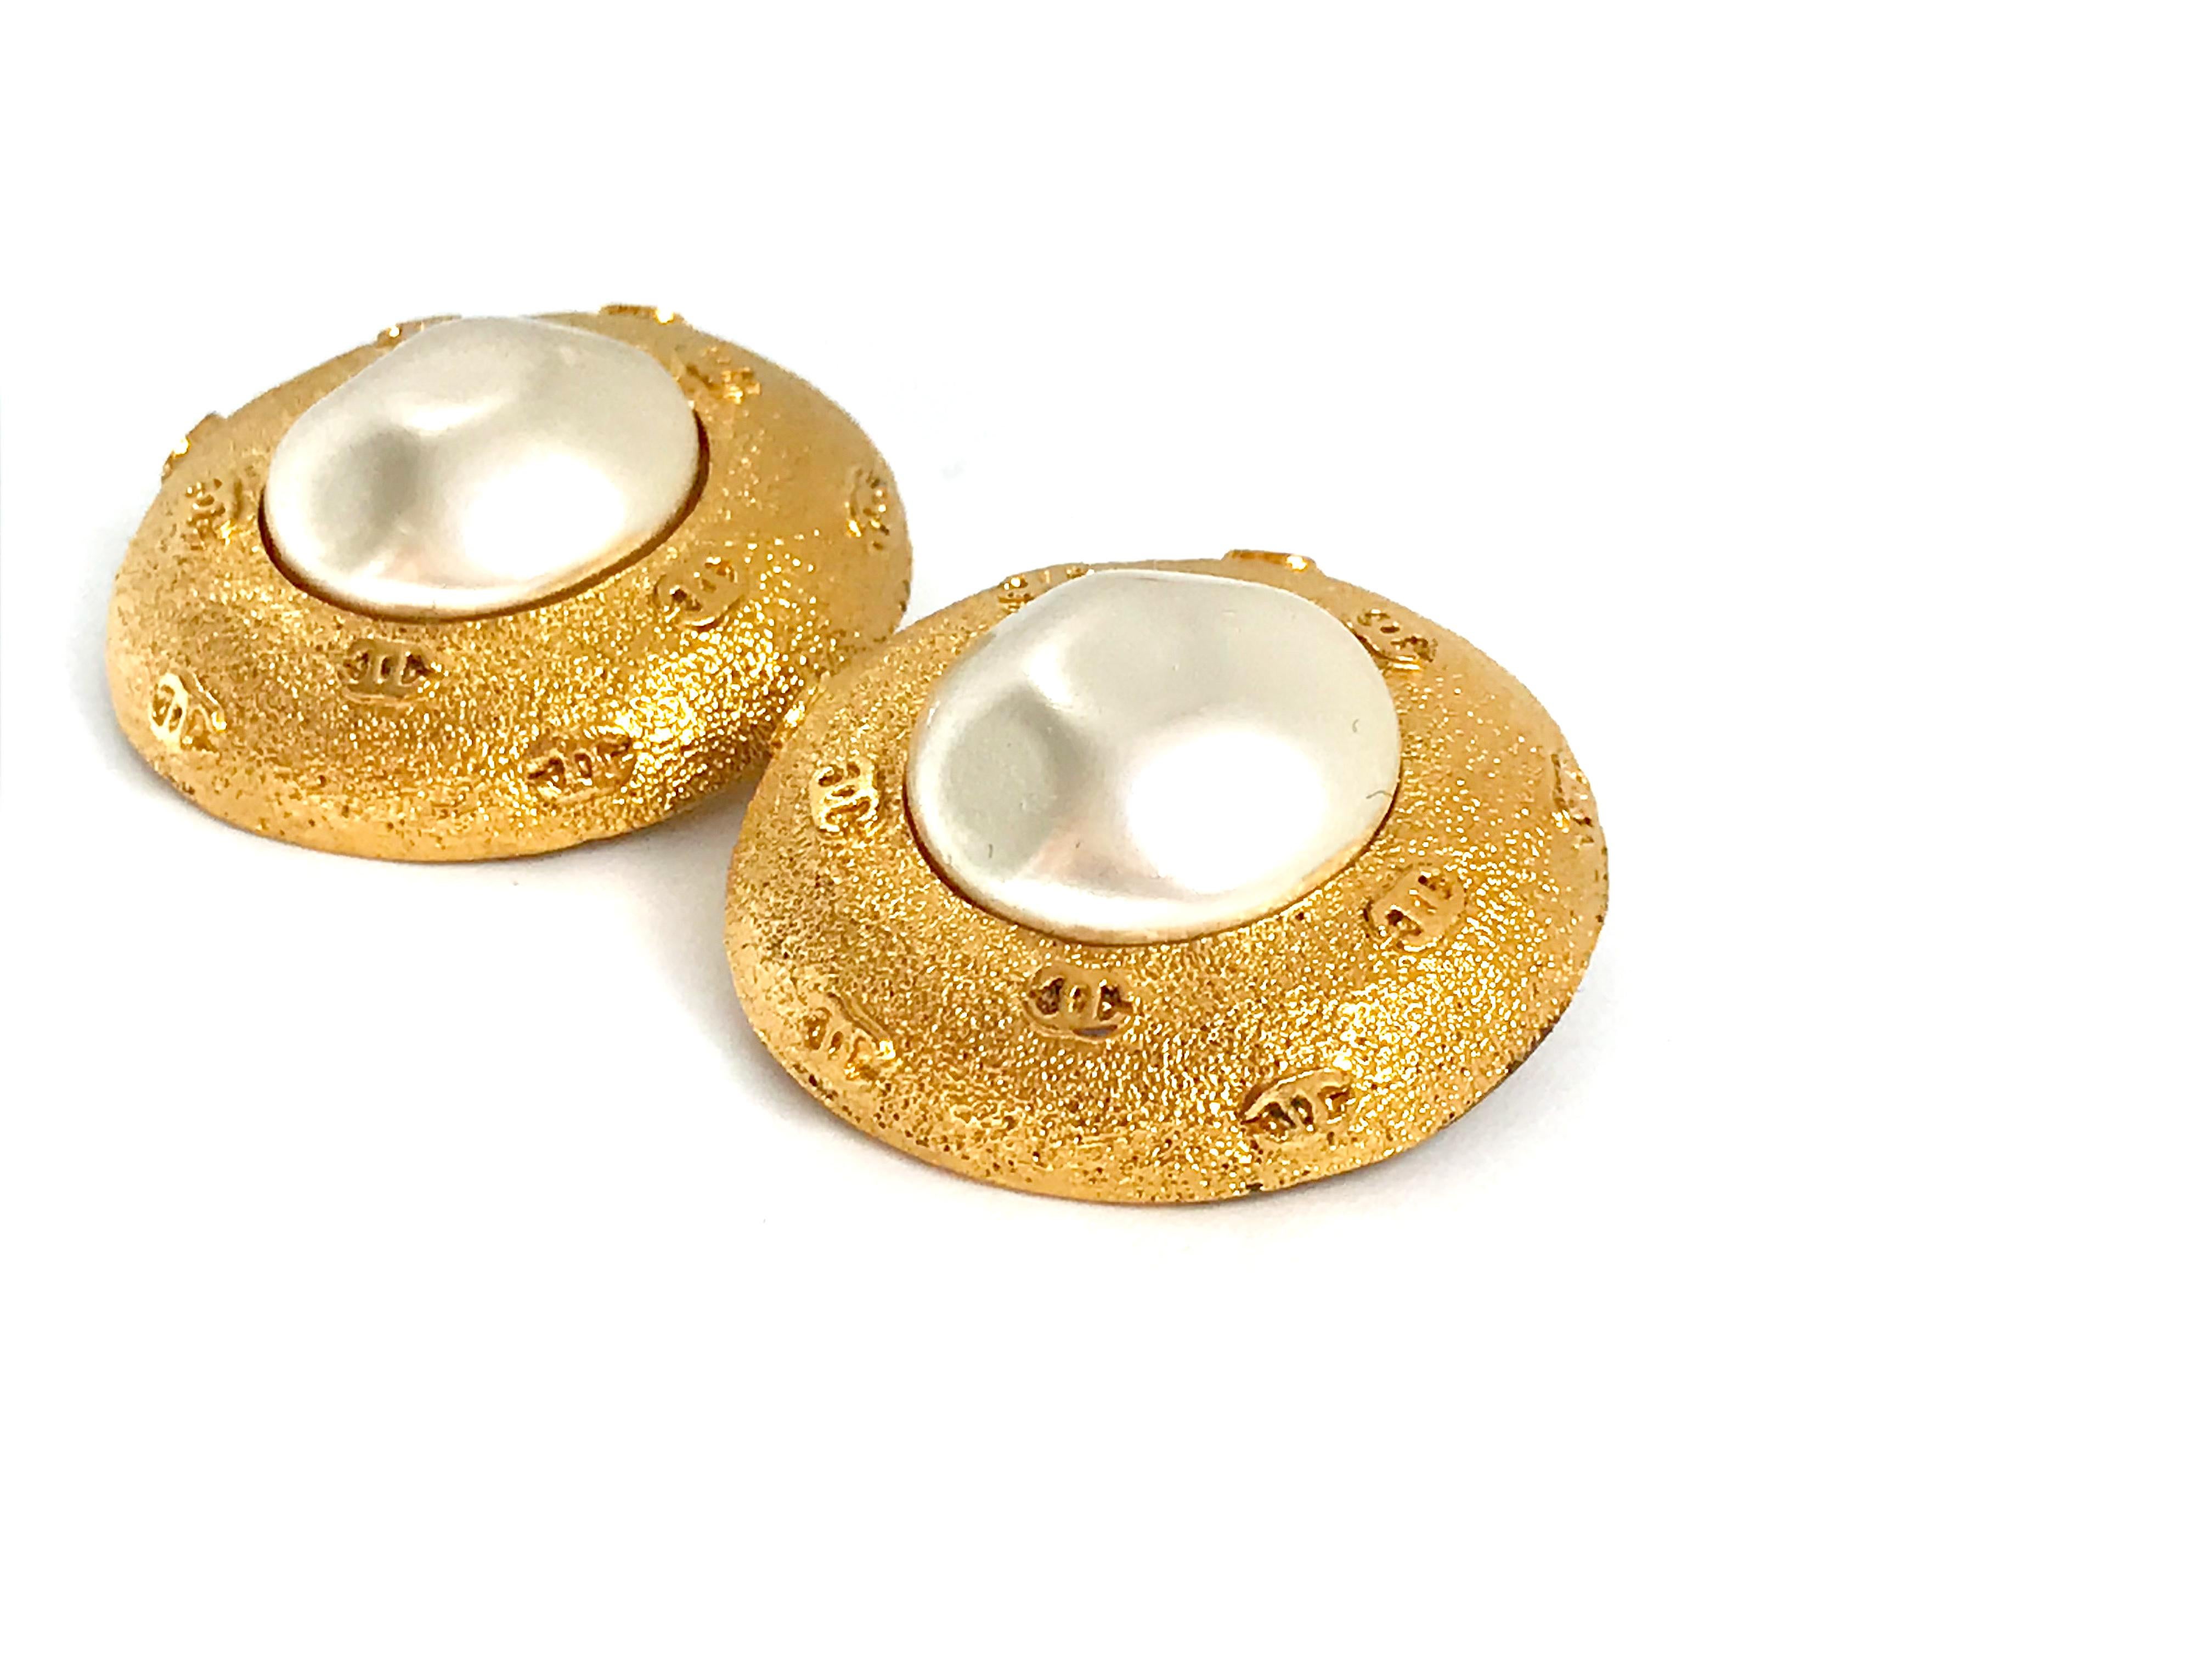 Fabulous Chanel 1980s Vintage Clip On Faux Pearl Earrings.  Feature multiple CC logos around the pearl centre.  From the Chanel heyday under the creative guidance of Victoire de Castellane.

Size: 3 cm / 1.3'' (approx.)  

Hallmarked & numbered with